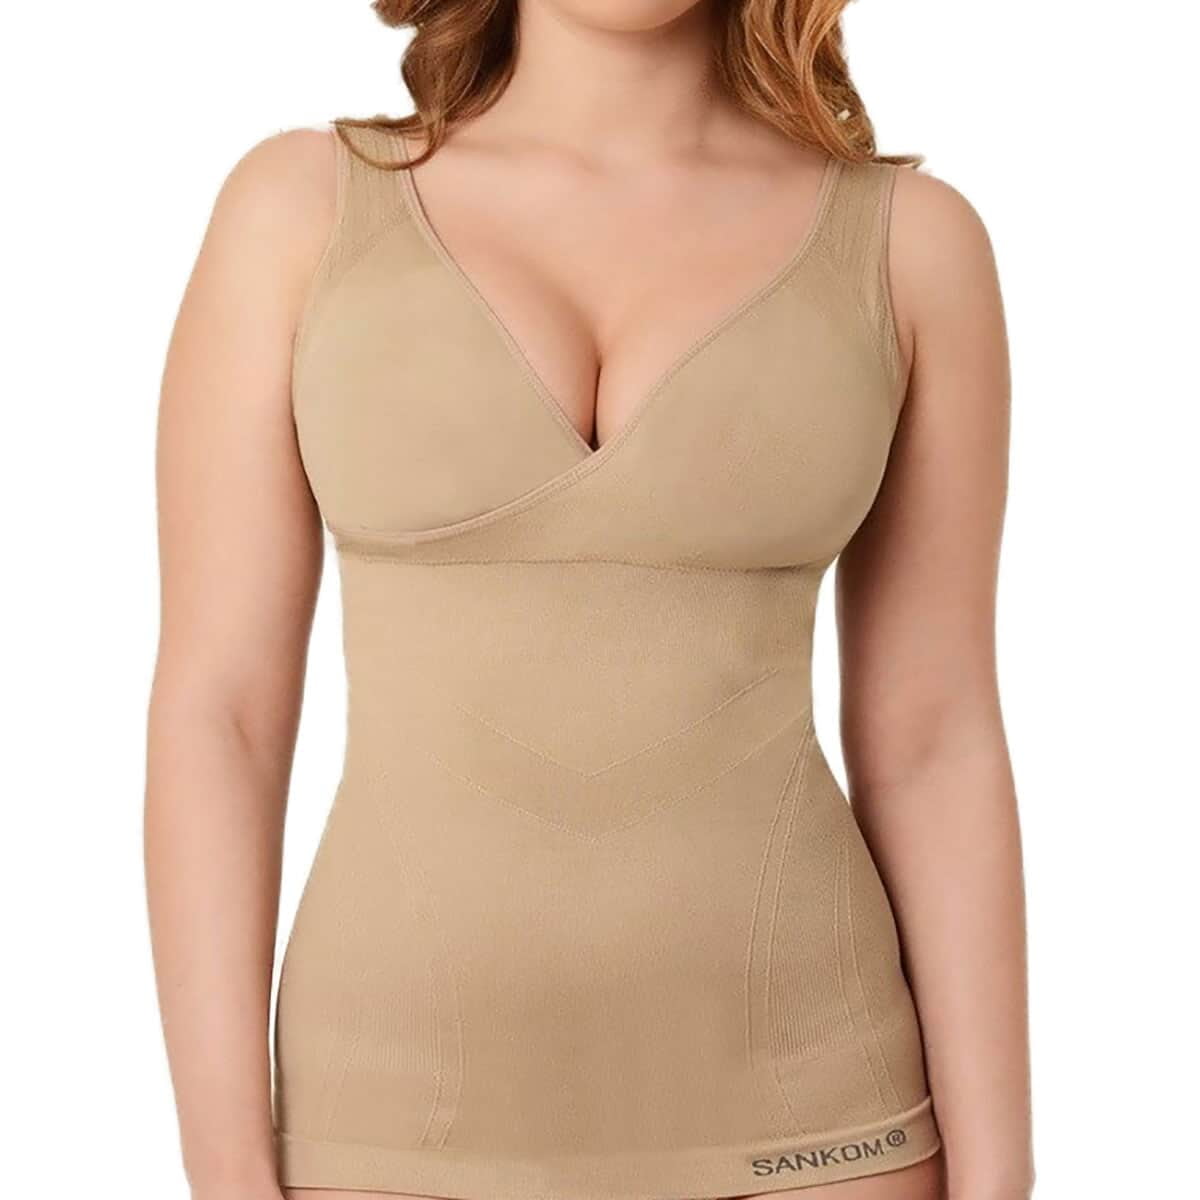 Shop LC SANKOM Beige Color Patent Classic Shaping Camisole with